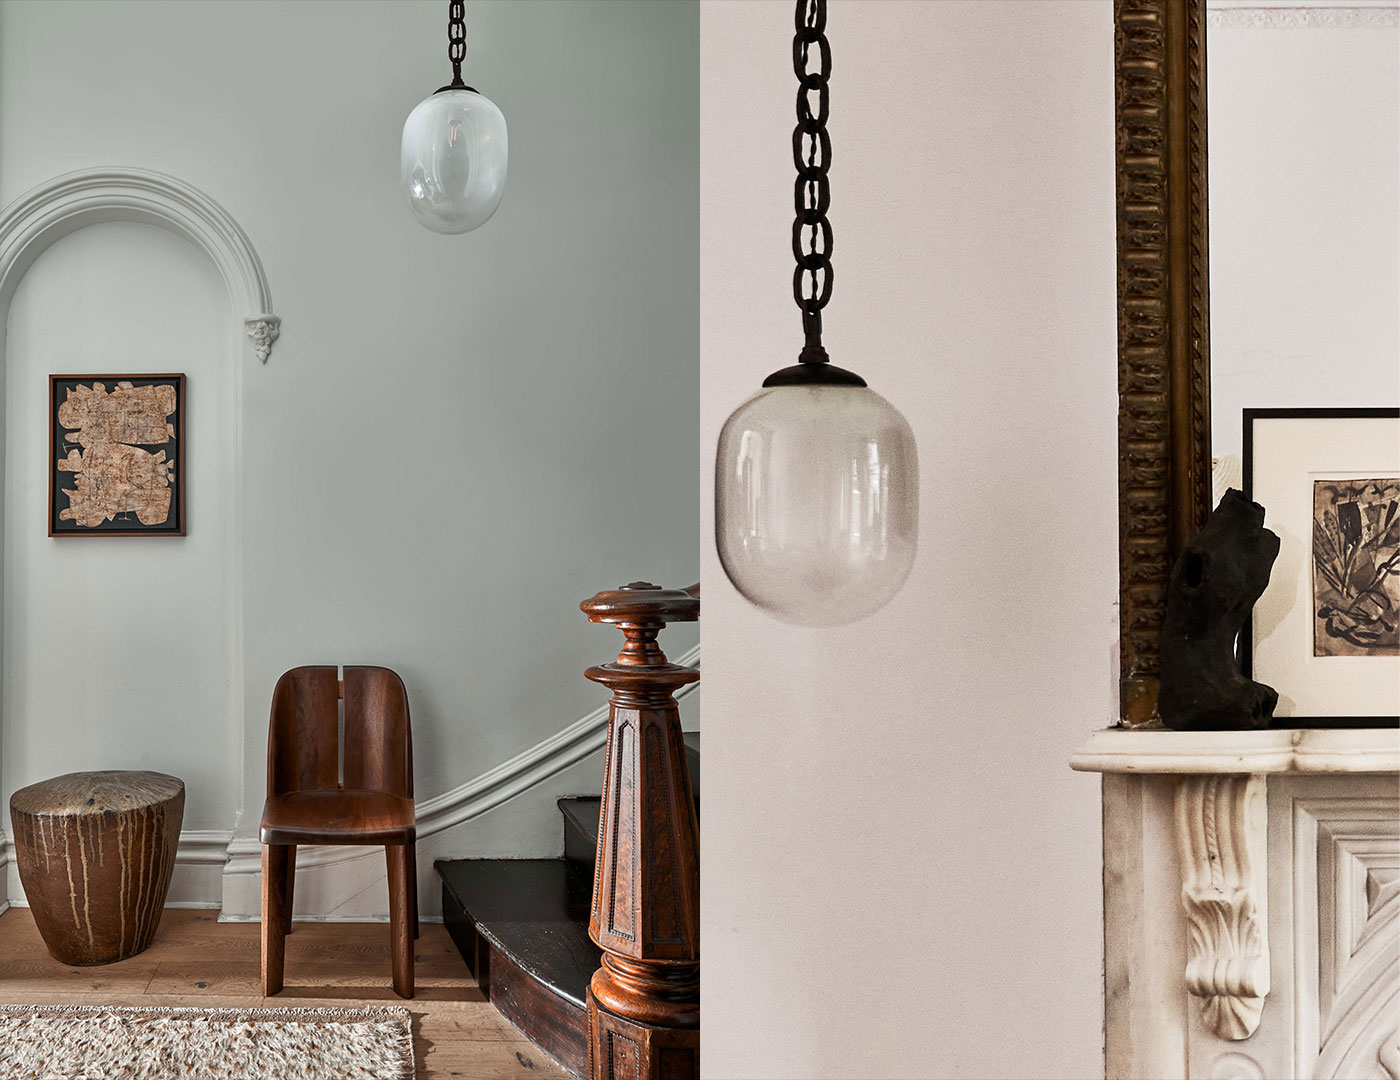 The Seed Pendant light places along with other pieces from the RW Guild’s latest collection